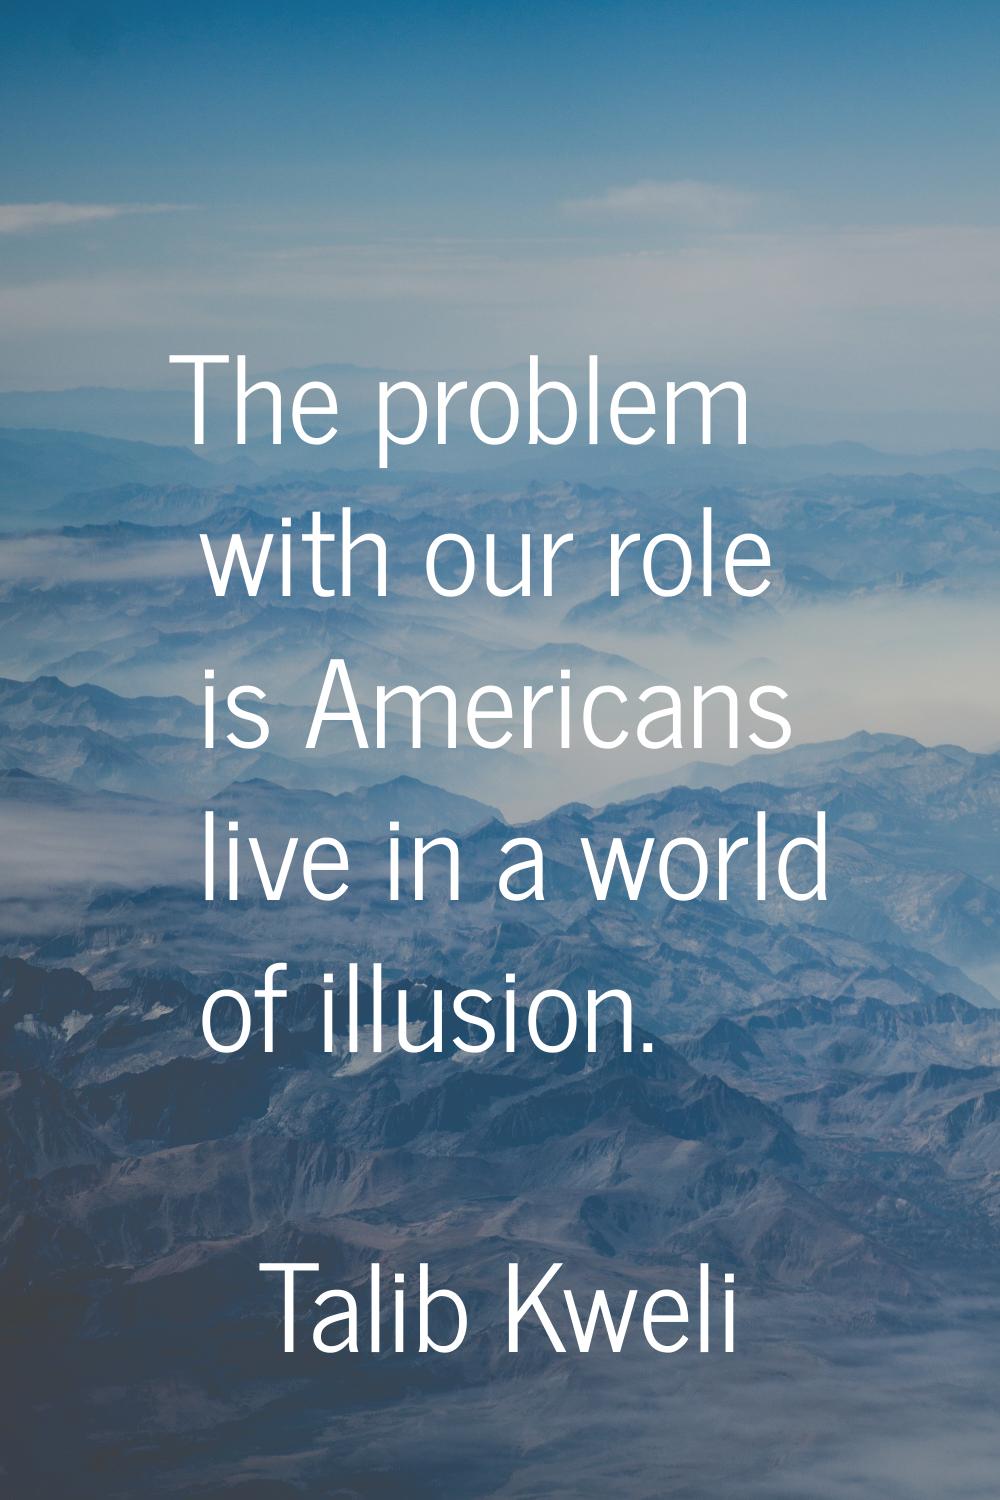 The problem with our role is Americans live in a world of illusion.